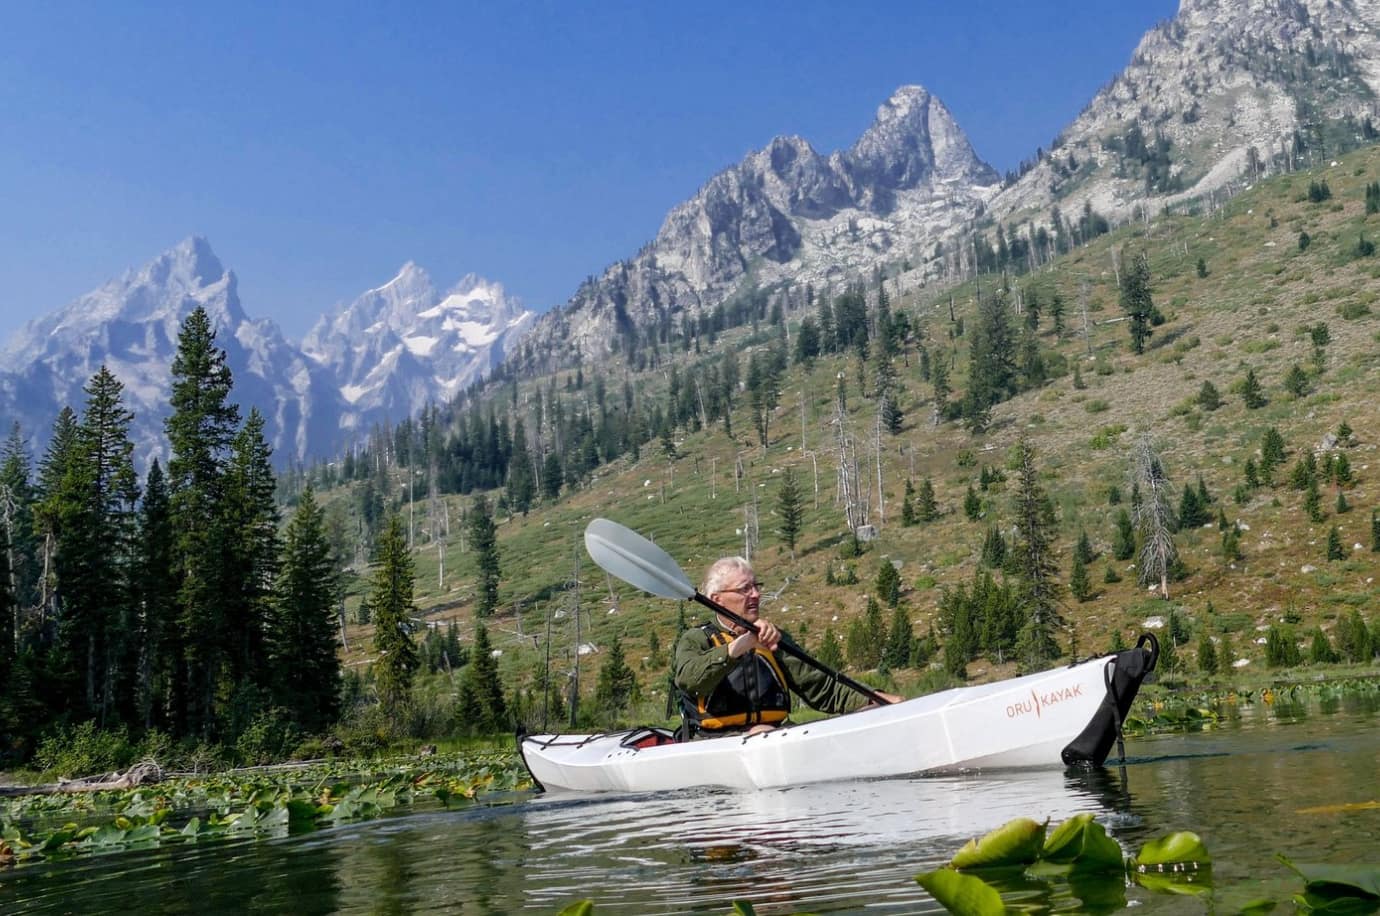 Man kayaking on the lake surrounded by mountains